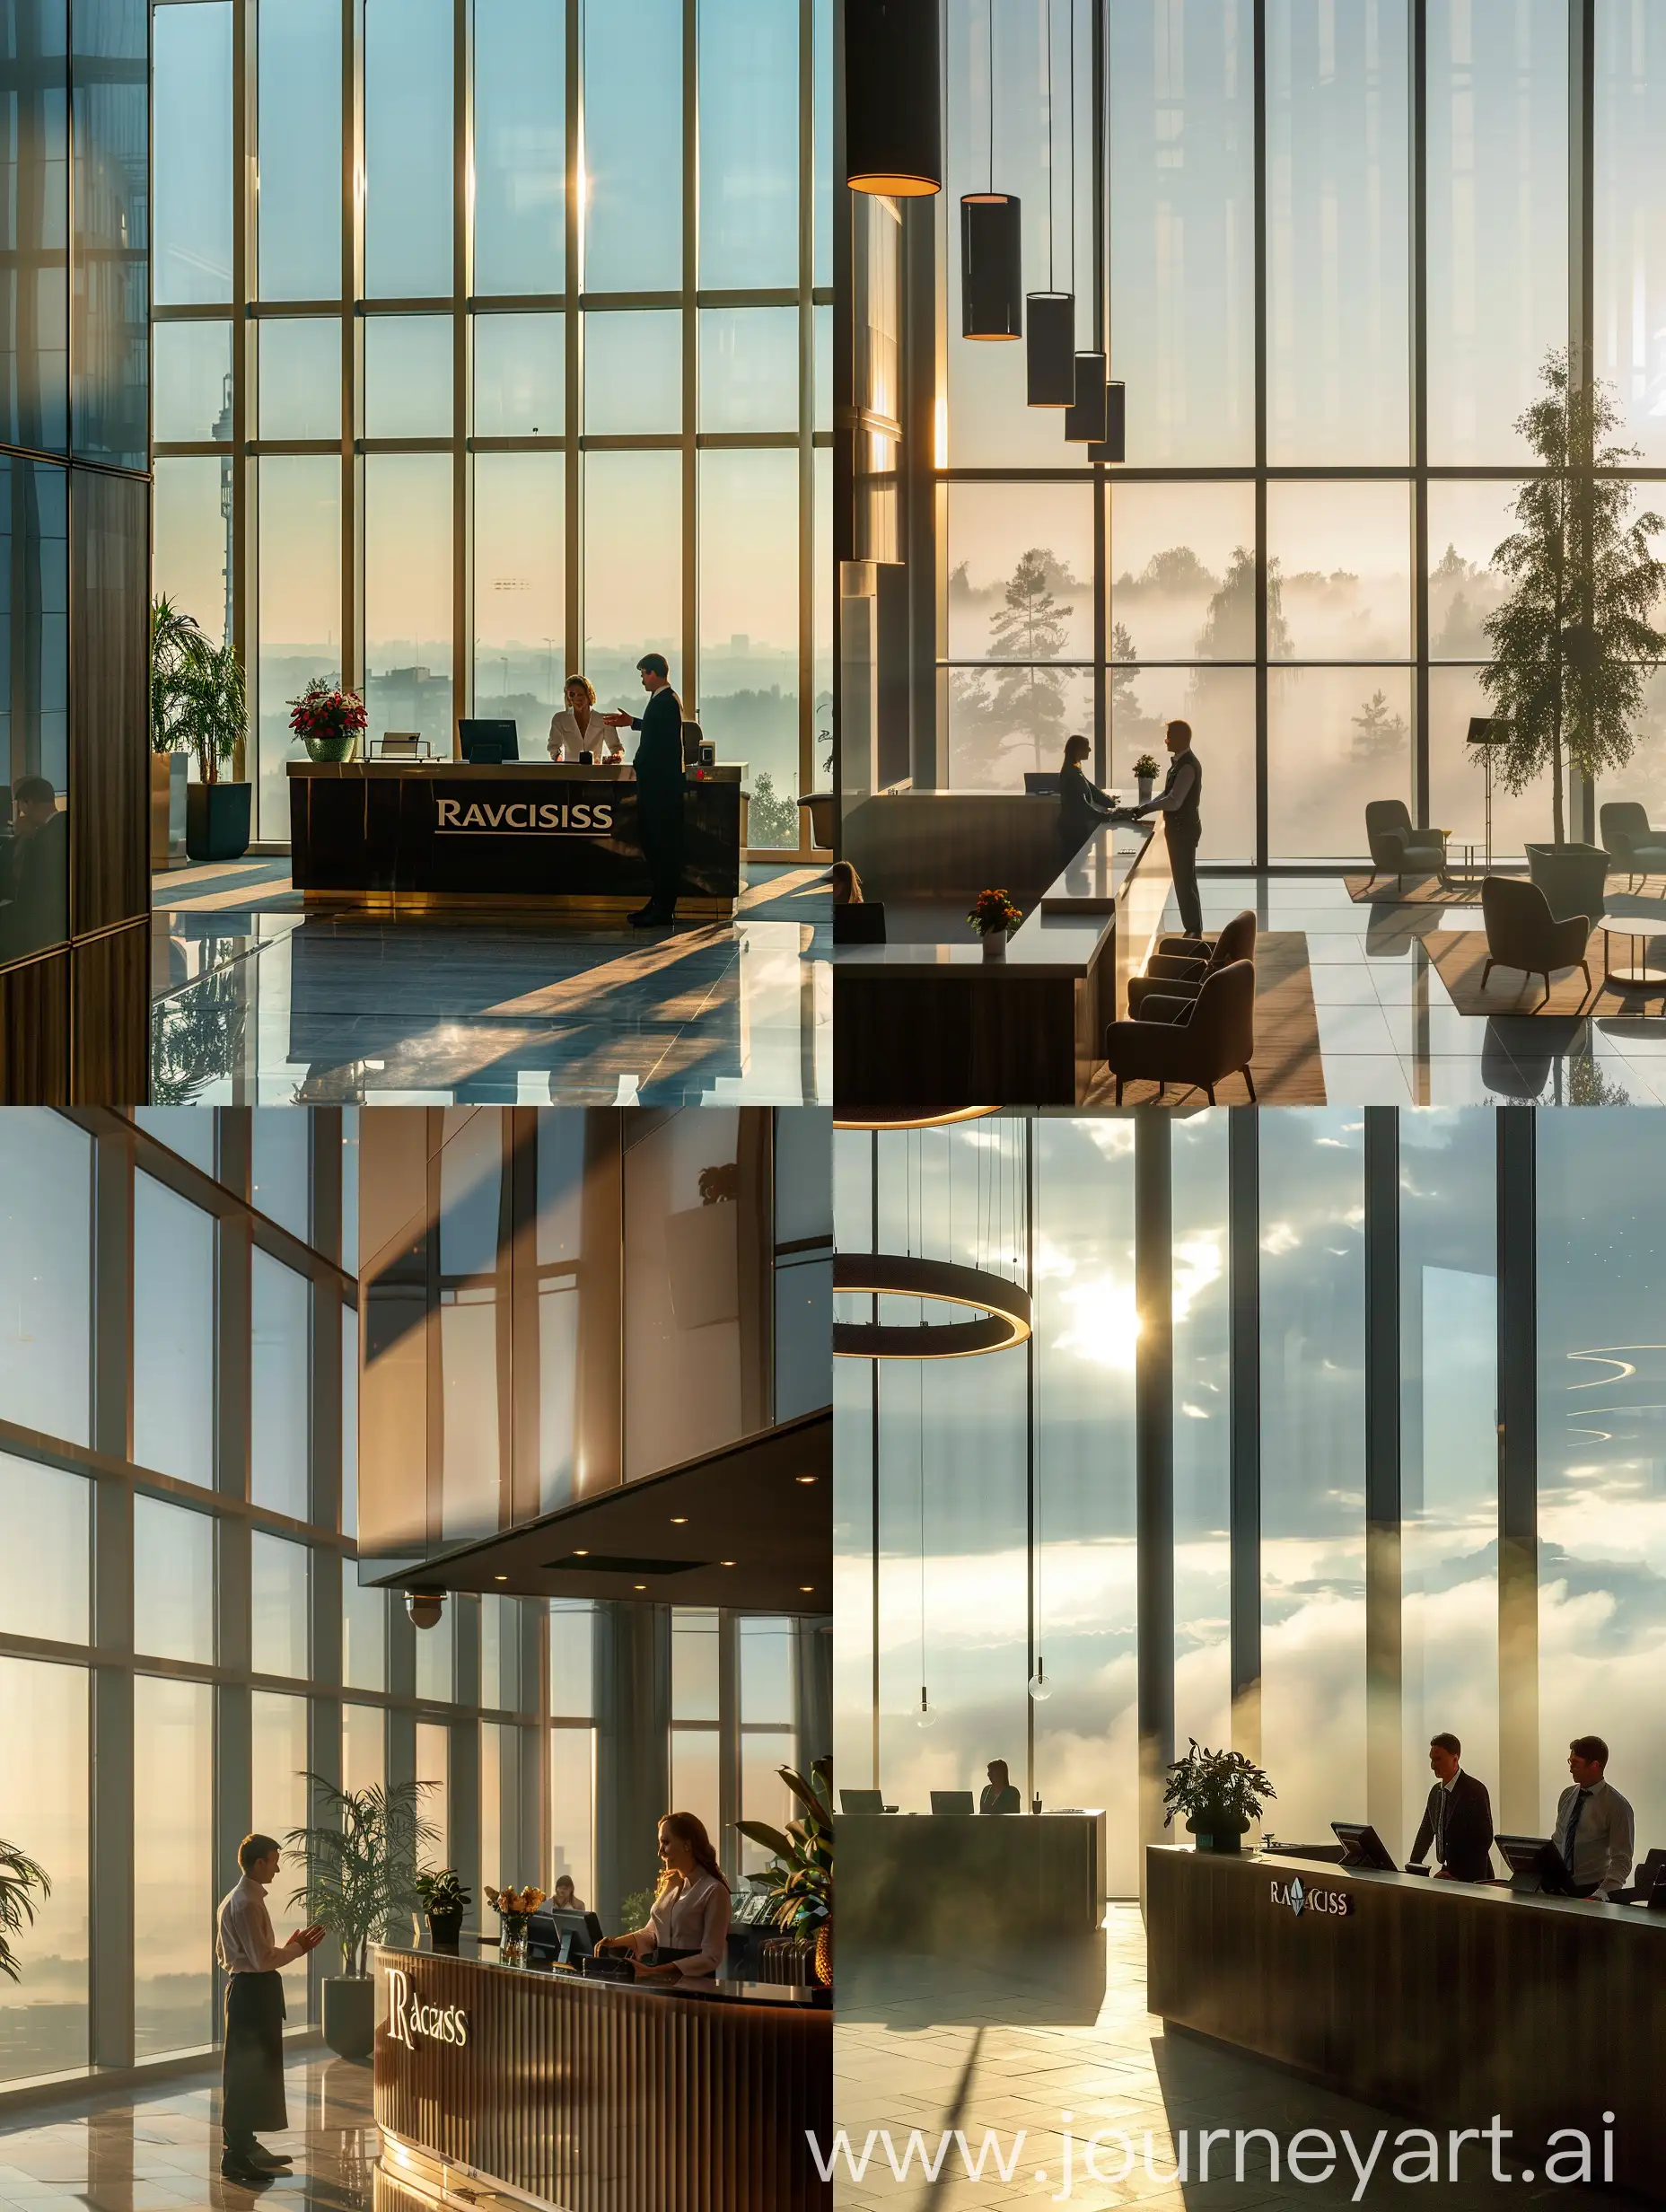 inside Radisson hotel in Russia, 40th floor, with amazing view, scandic interier, reception desk, reception administrator welcoming a guest, big windows, summer haze outside